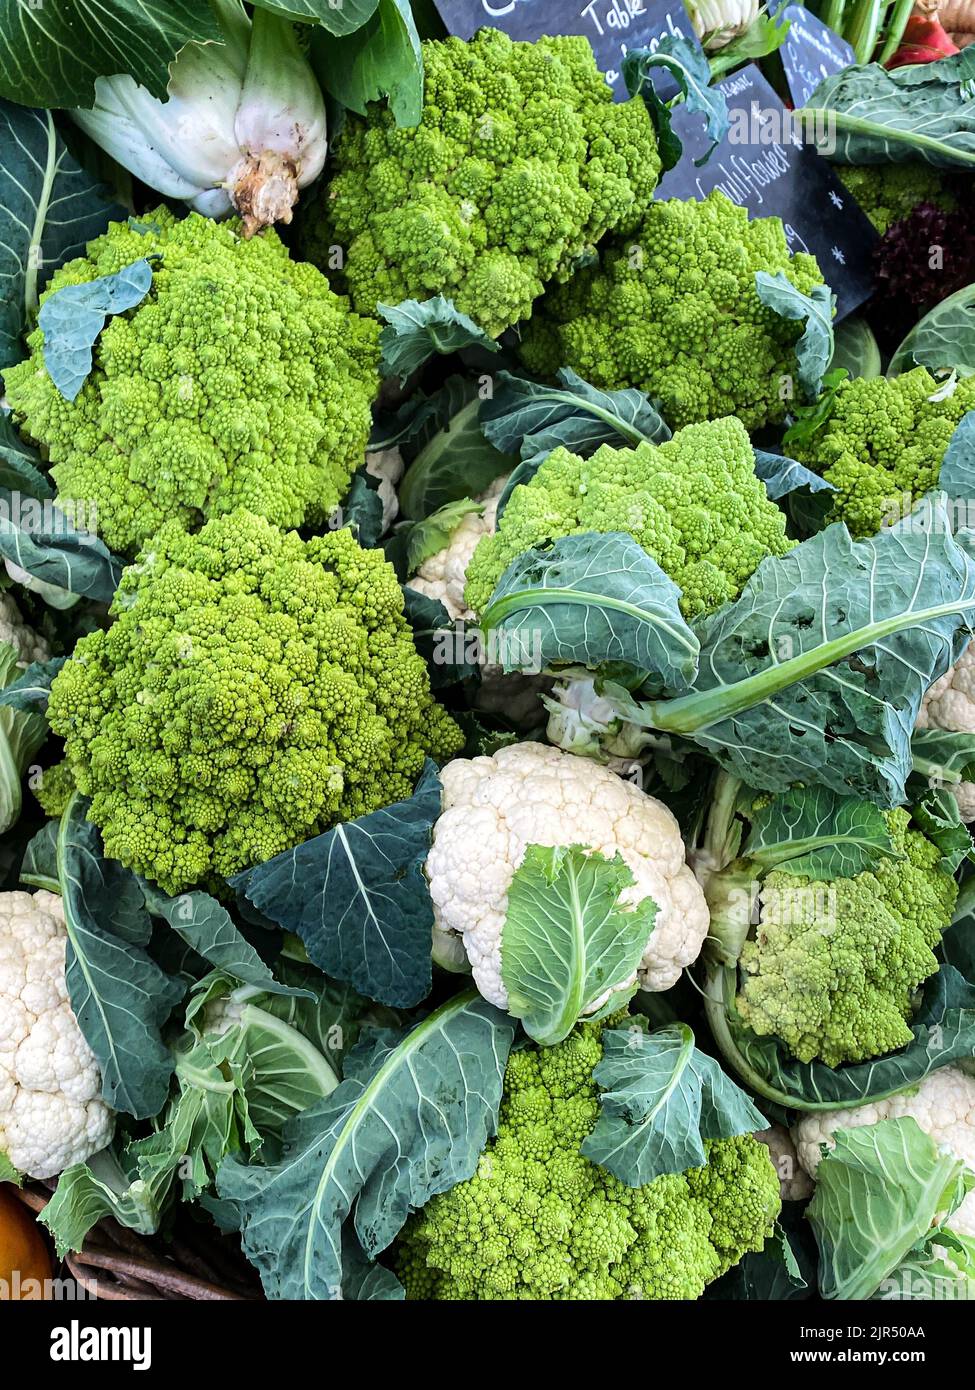 Romanesco and Cauliflower for sale at Farmers Market in Cape Town, South Africa Stock Photo